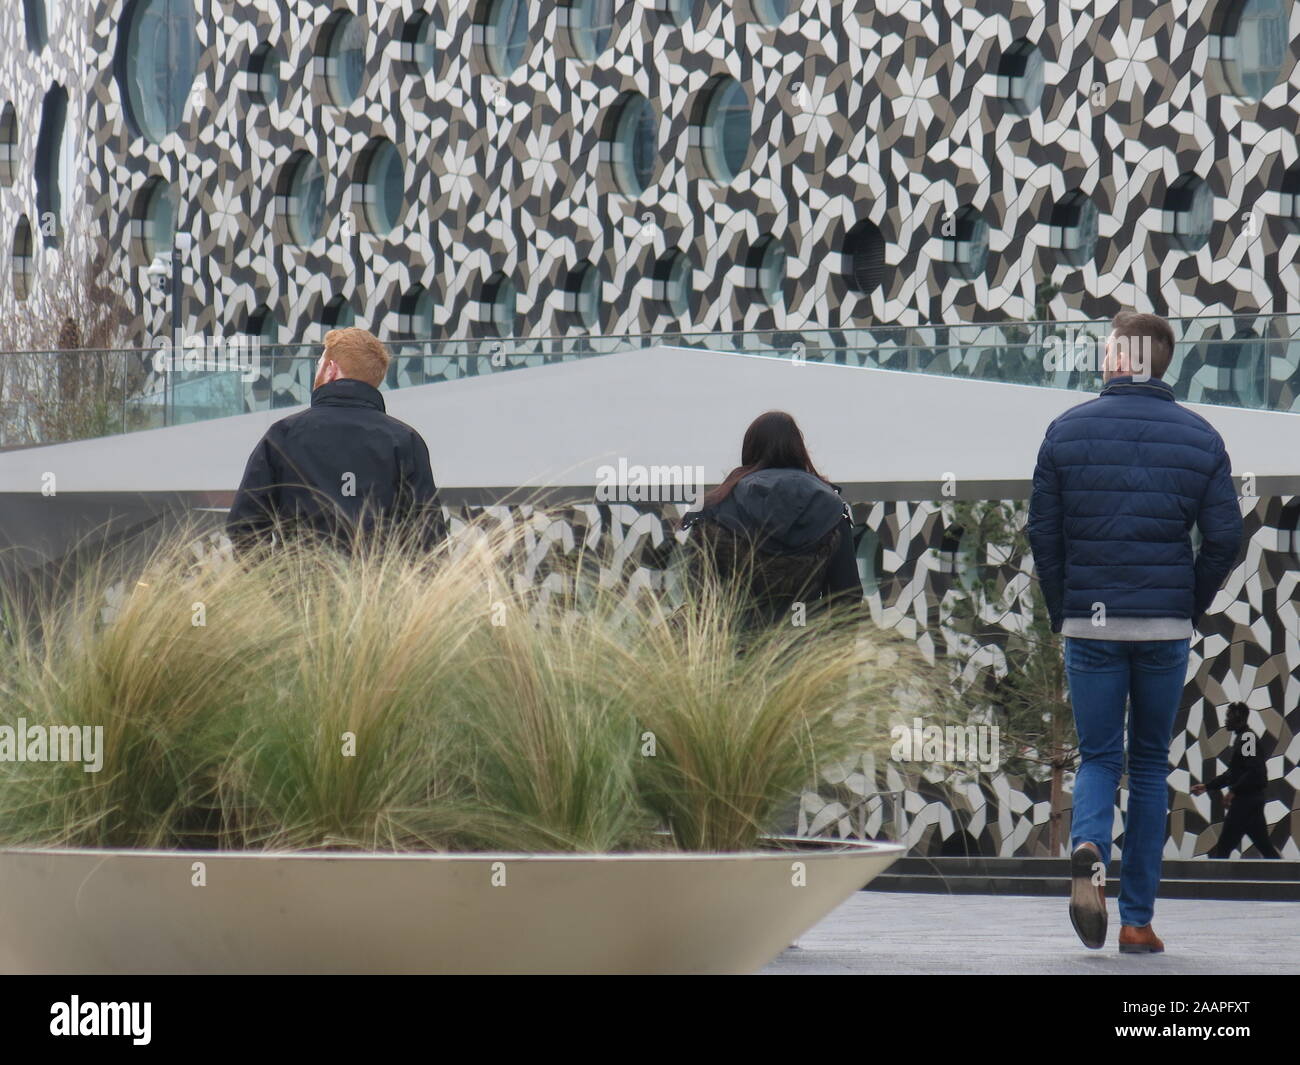 Three young people walk towards an eye-catching building, which has patterned mosaic cladding on the walls and round windows. Stock Photo